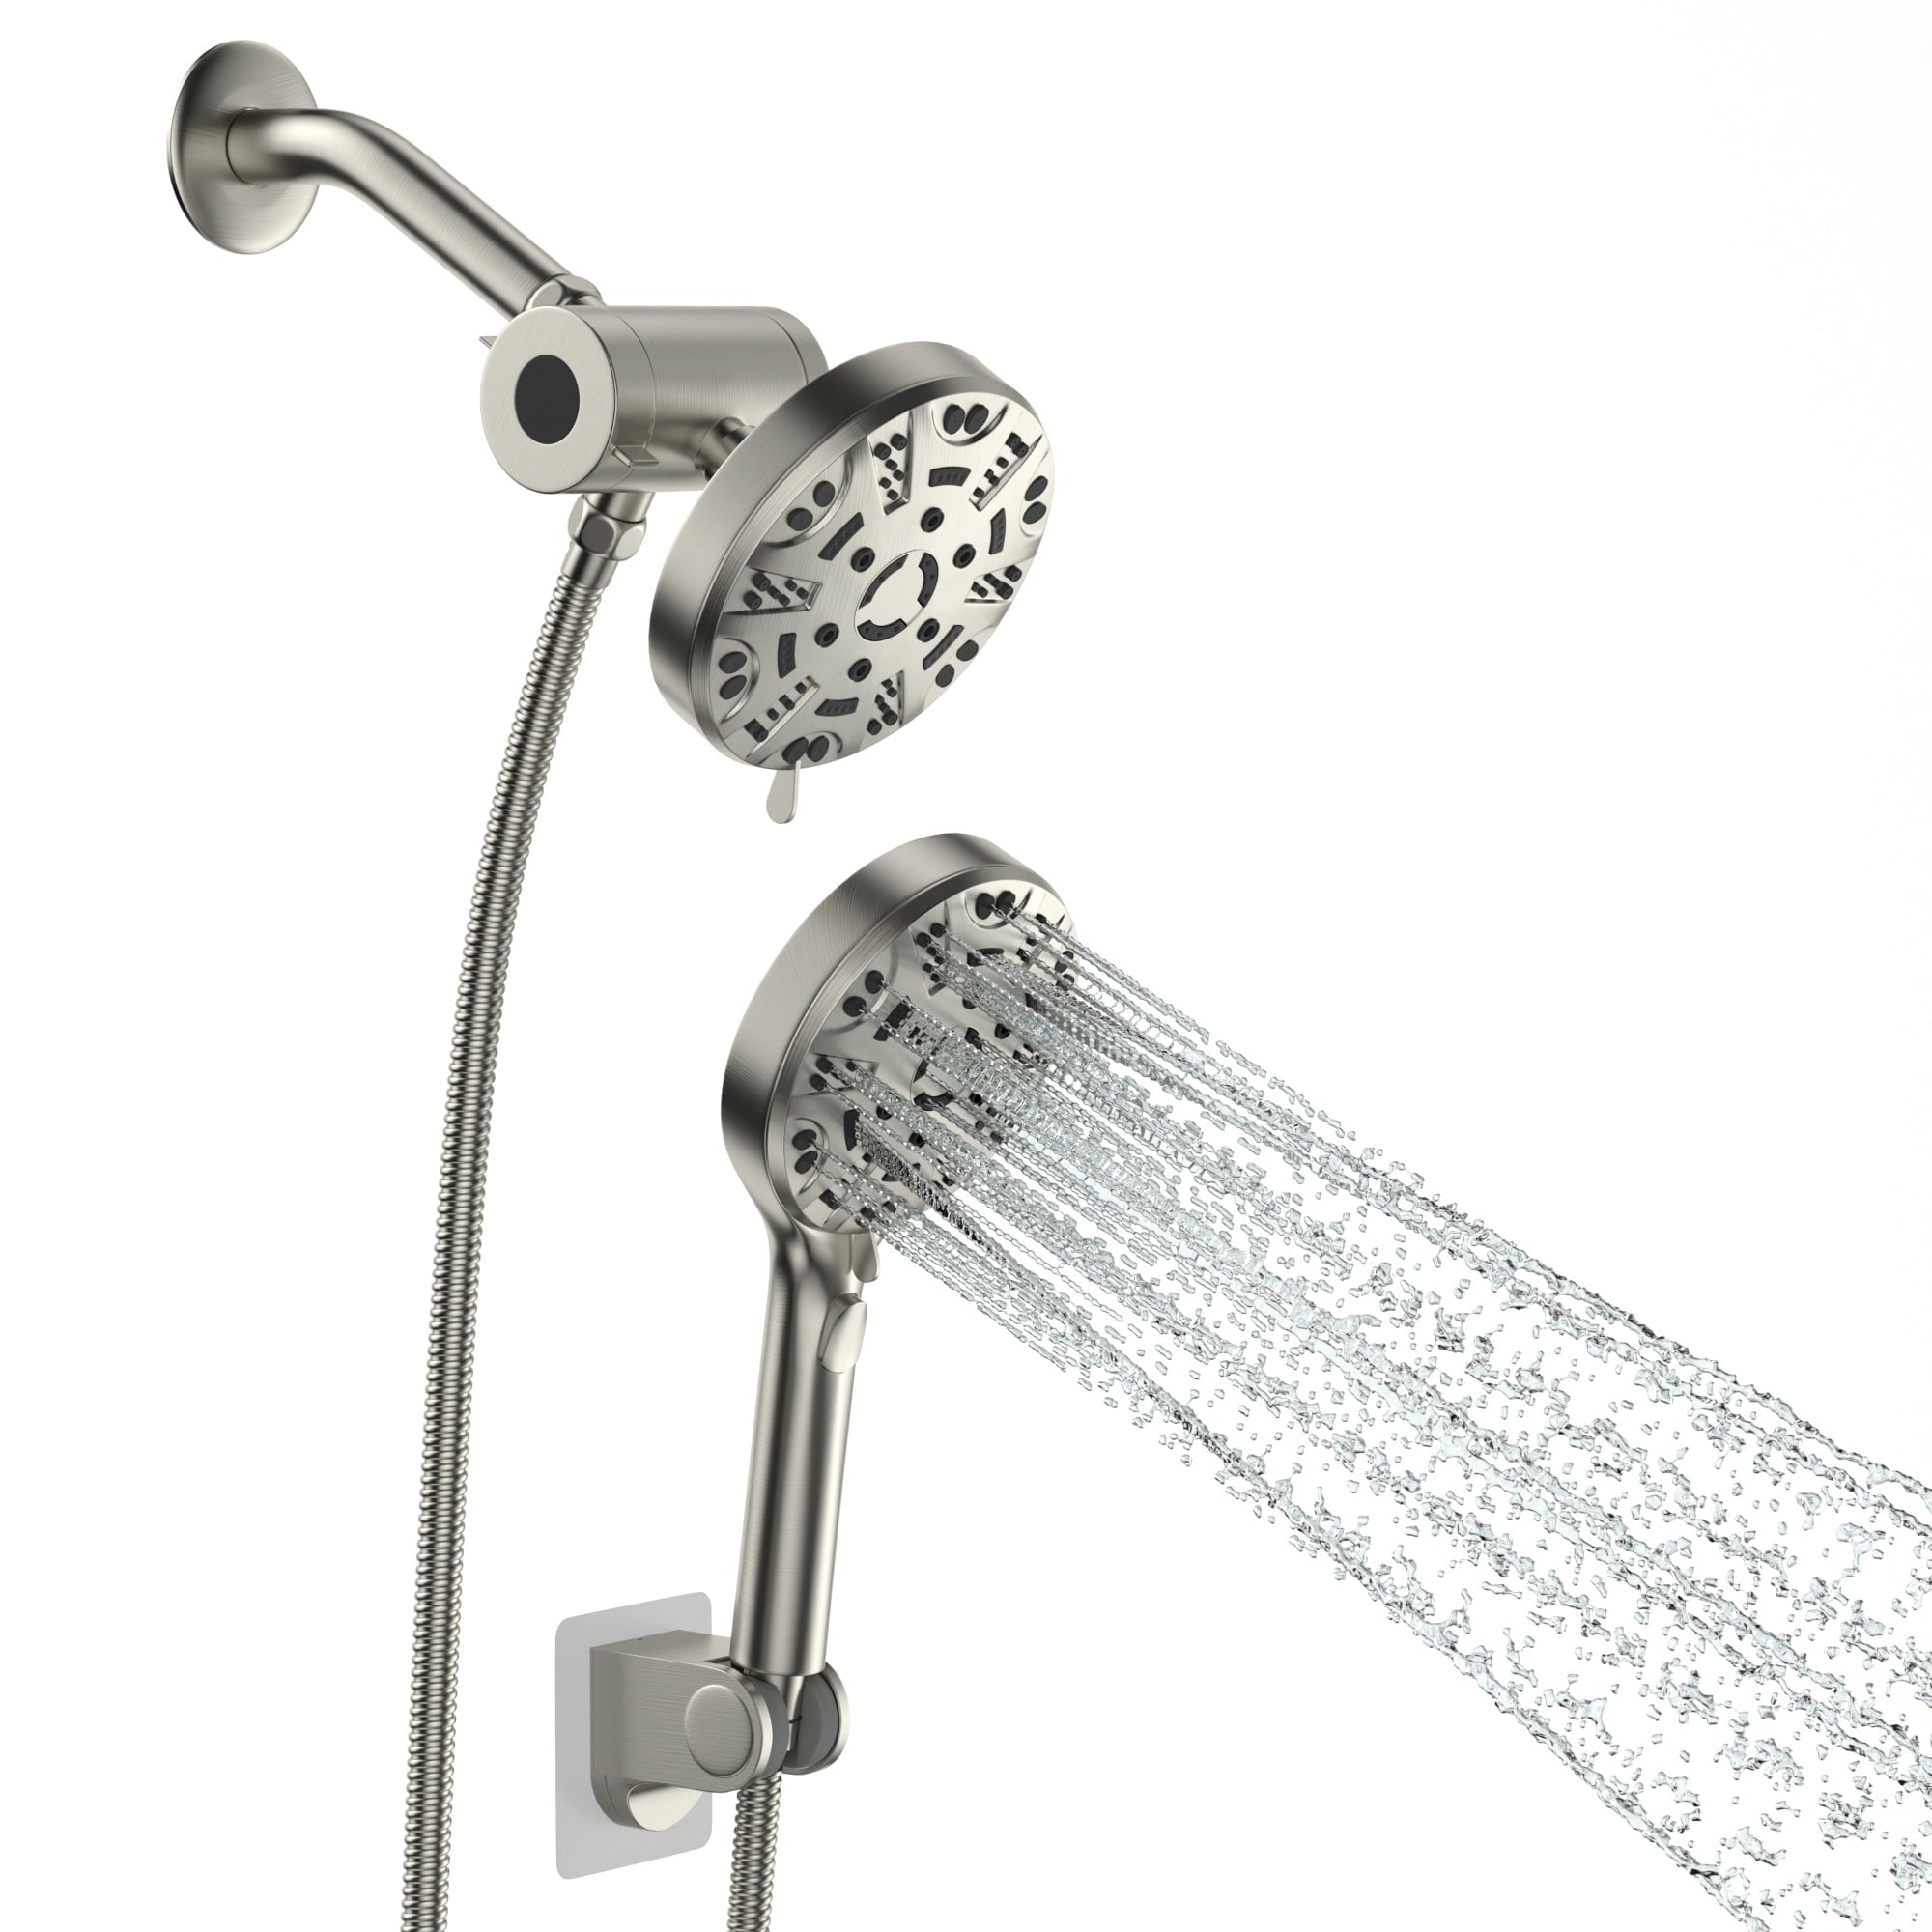 Lordear 8-Mode 5-inch Dual Showerhead with Pause Button Shower Bracket in Brushed Nickel | big sale, Handle Faucet, Shower, Shower Faucets & Systems, Shower System | Lordear